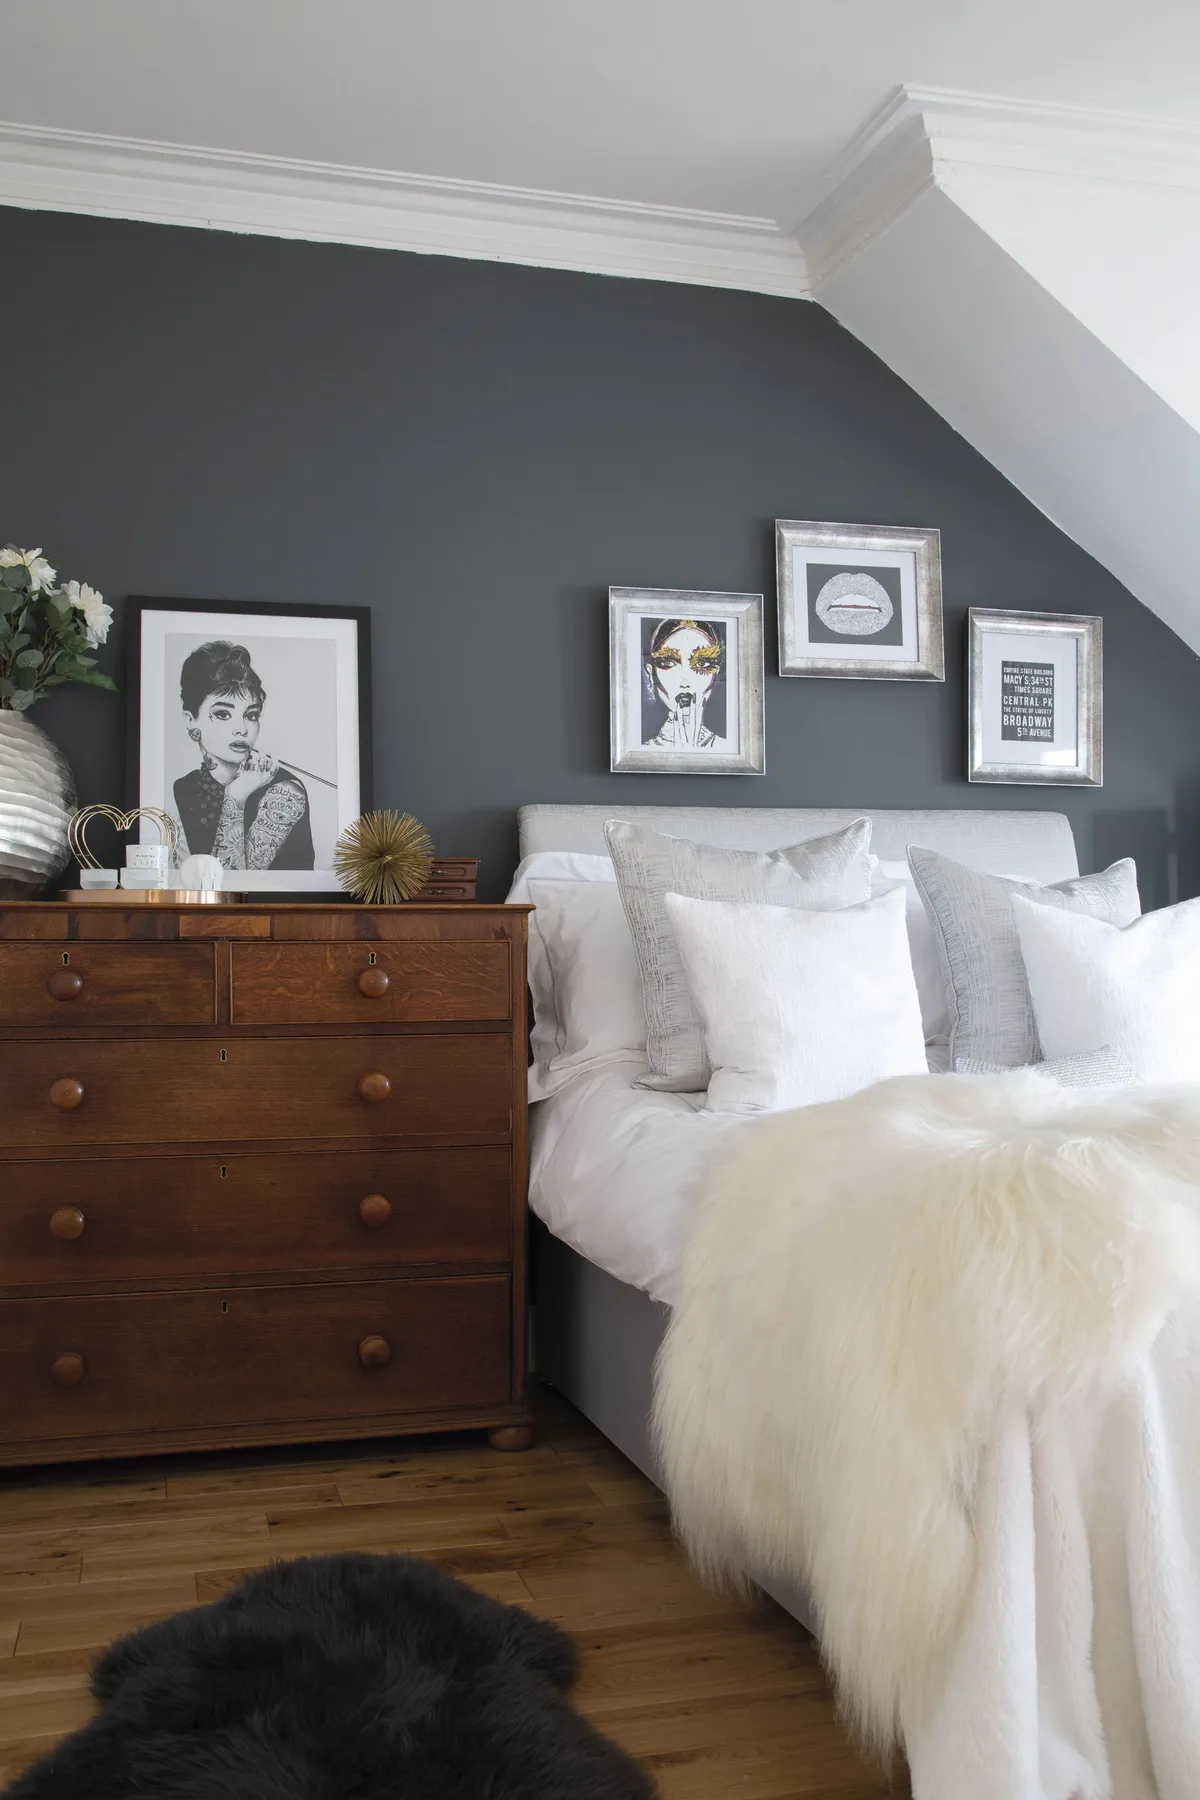 ‘I bought the drawers from Gumtree for £30 and I love how they look against the grey wall,’ says Lesley